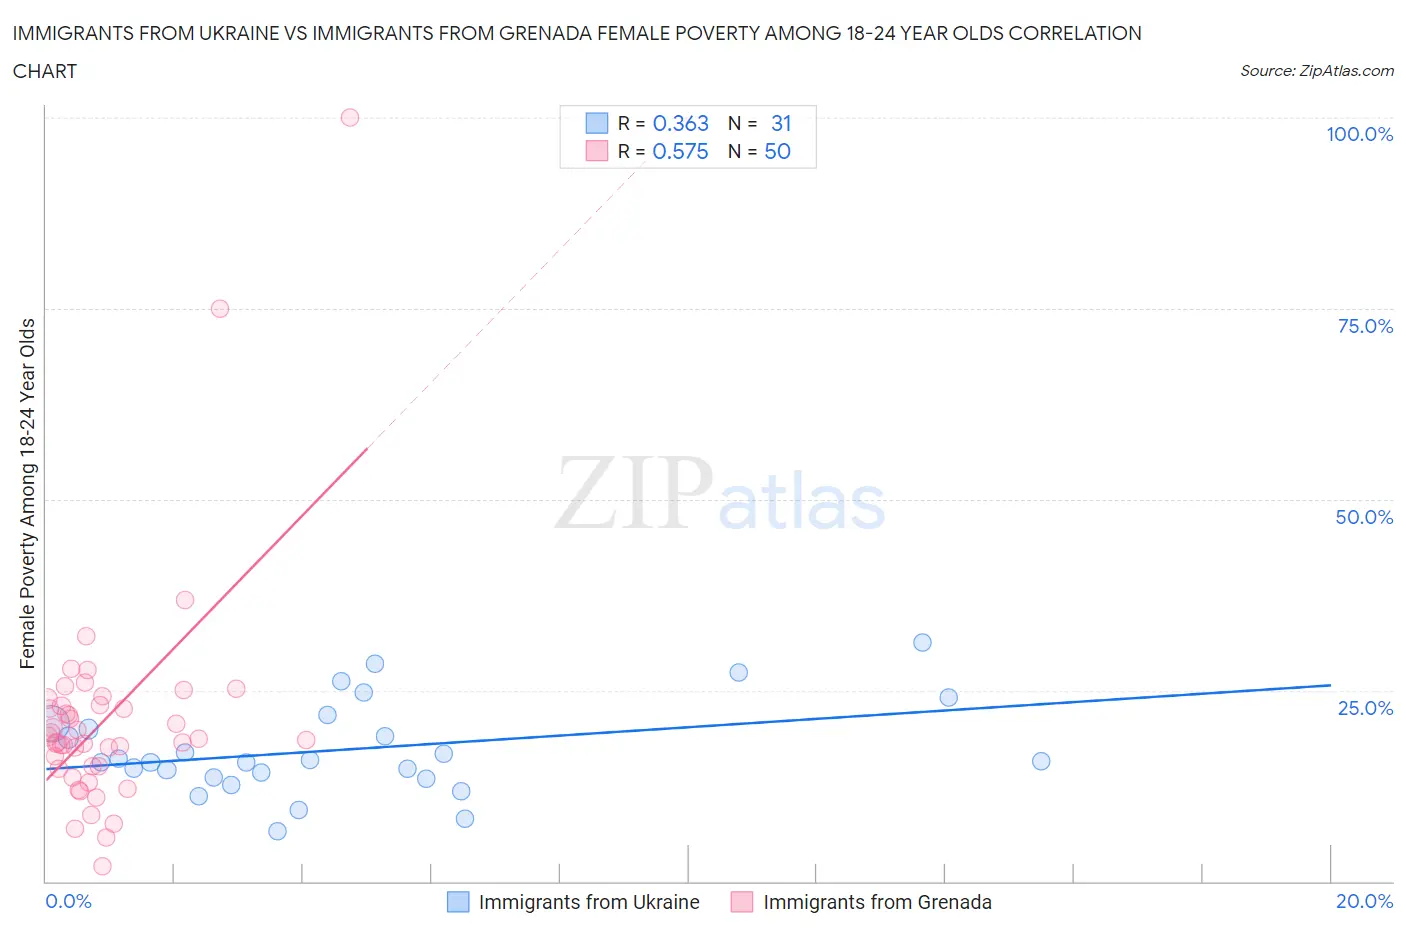 Immigrants from Ukraine vs Immigrants from Grenada Female Poverty Among 18-24 Year Olds